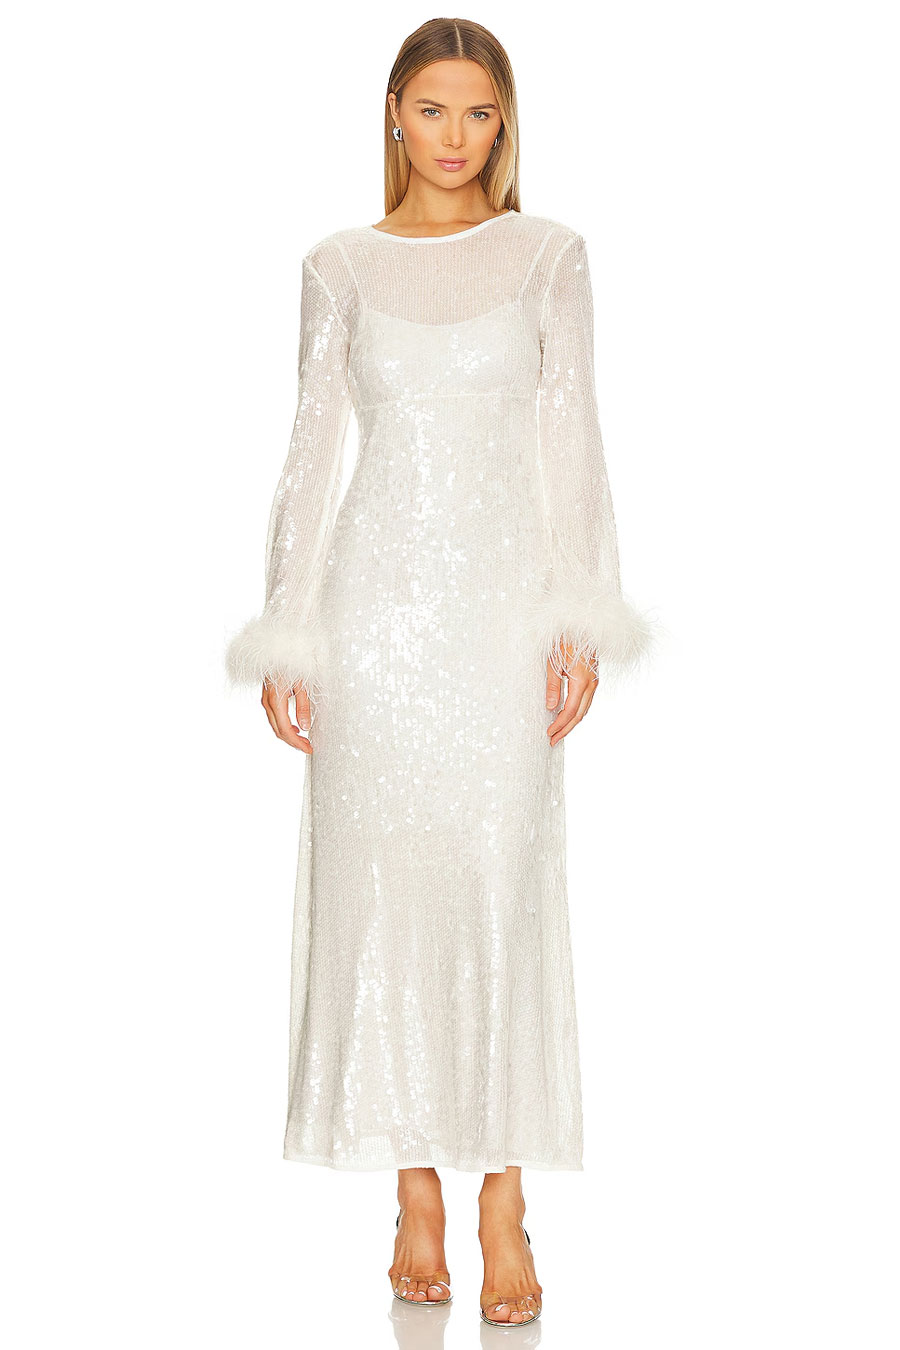 Elora Sequin Maxi Dress from House of Harlow 1960